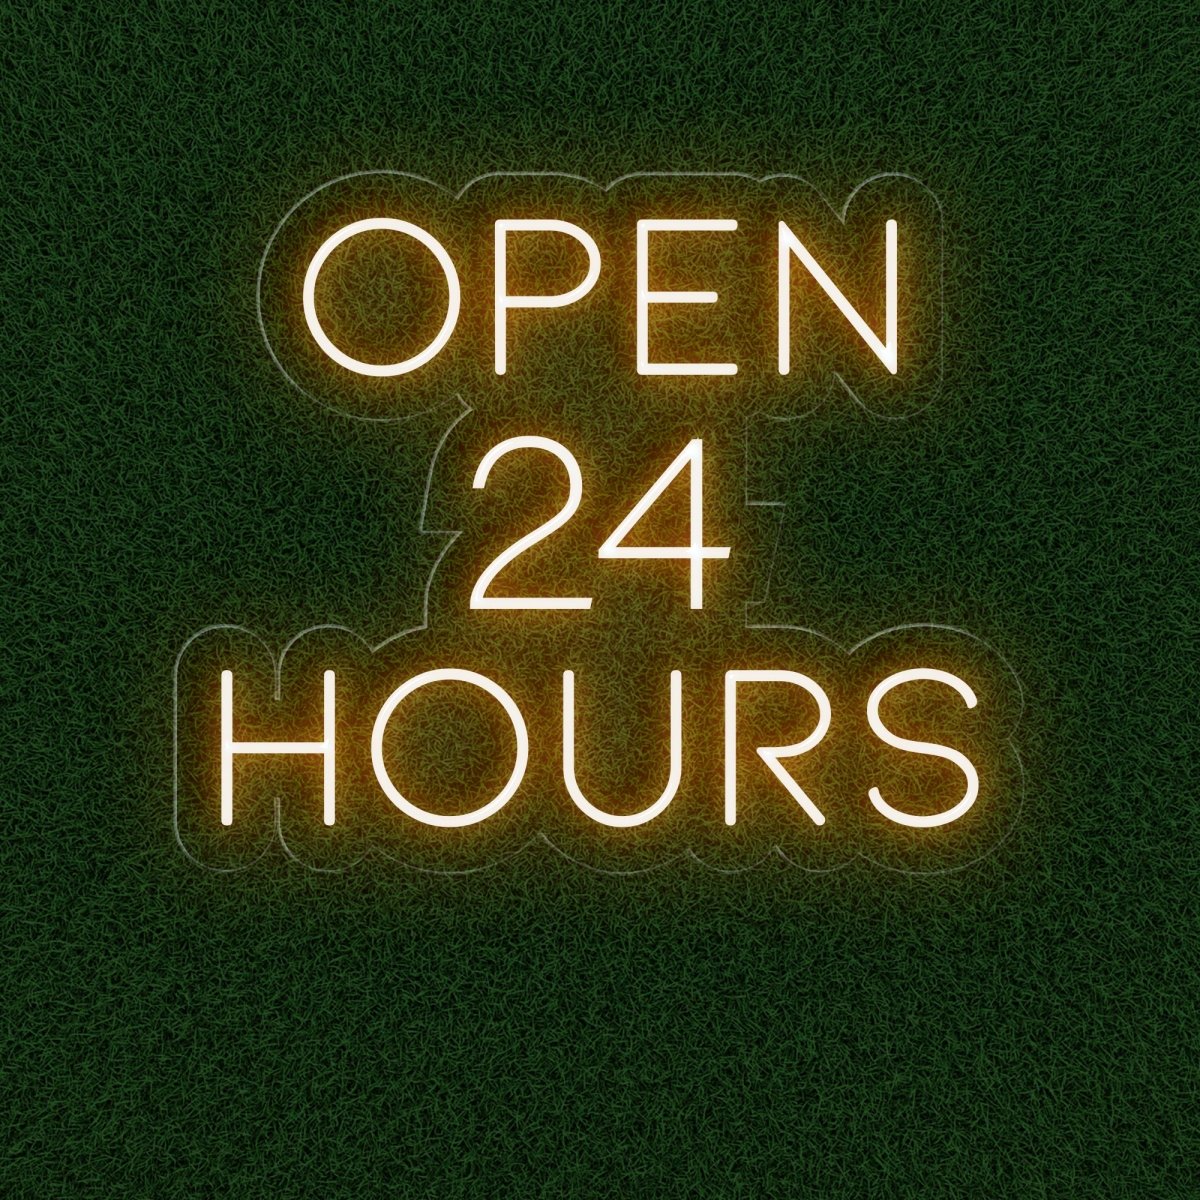 Open 24 Hours LED Neon Sign for Business - NEONXPERT